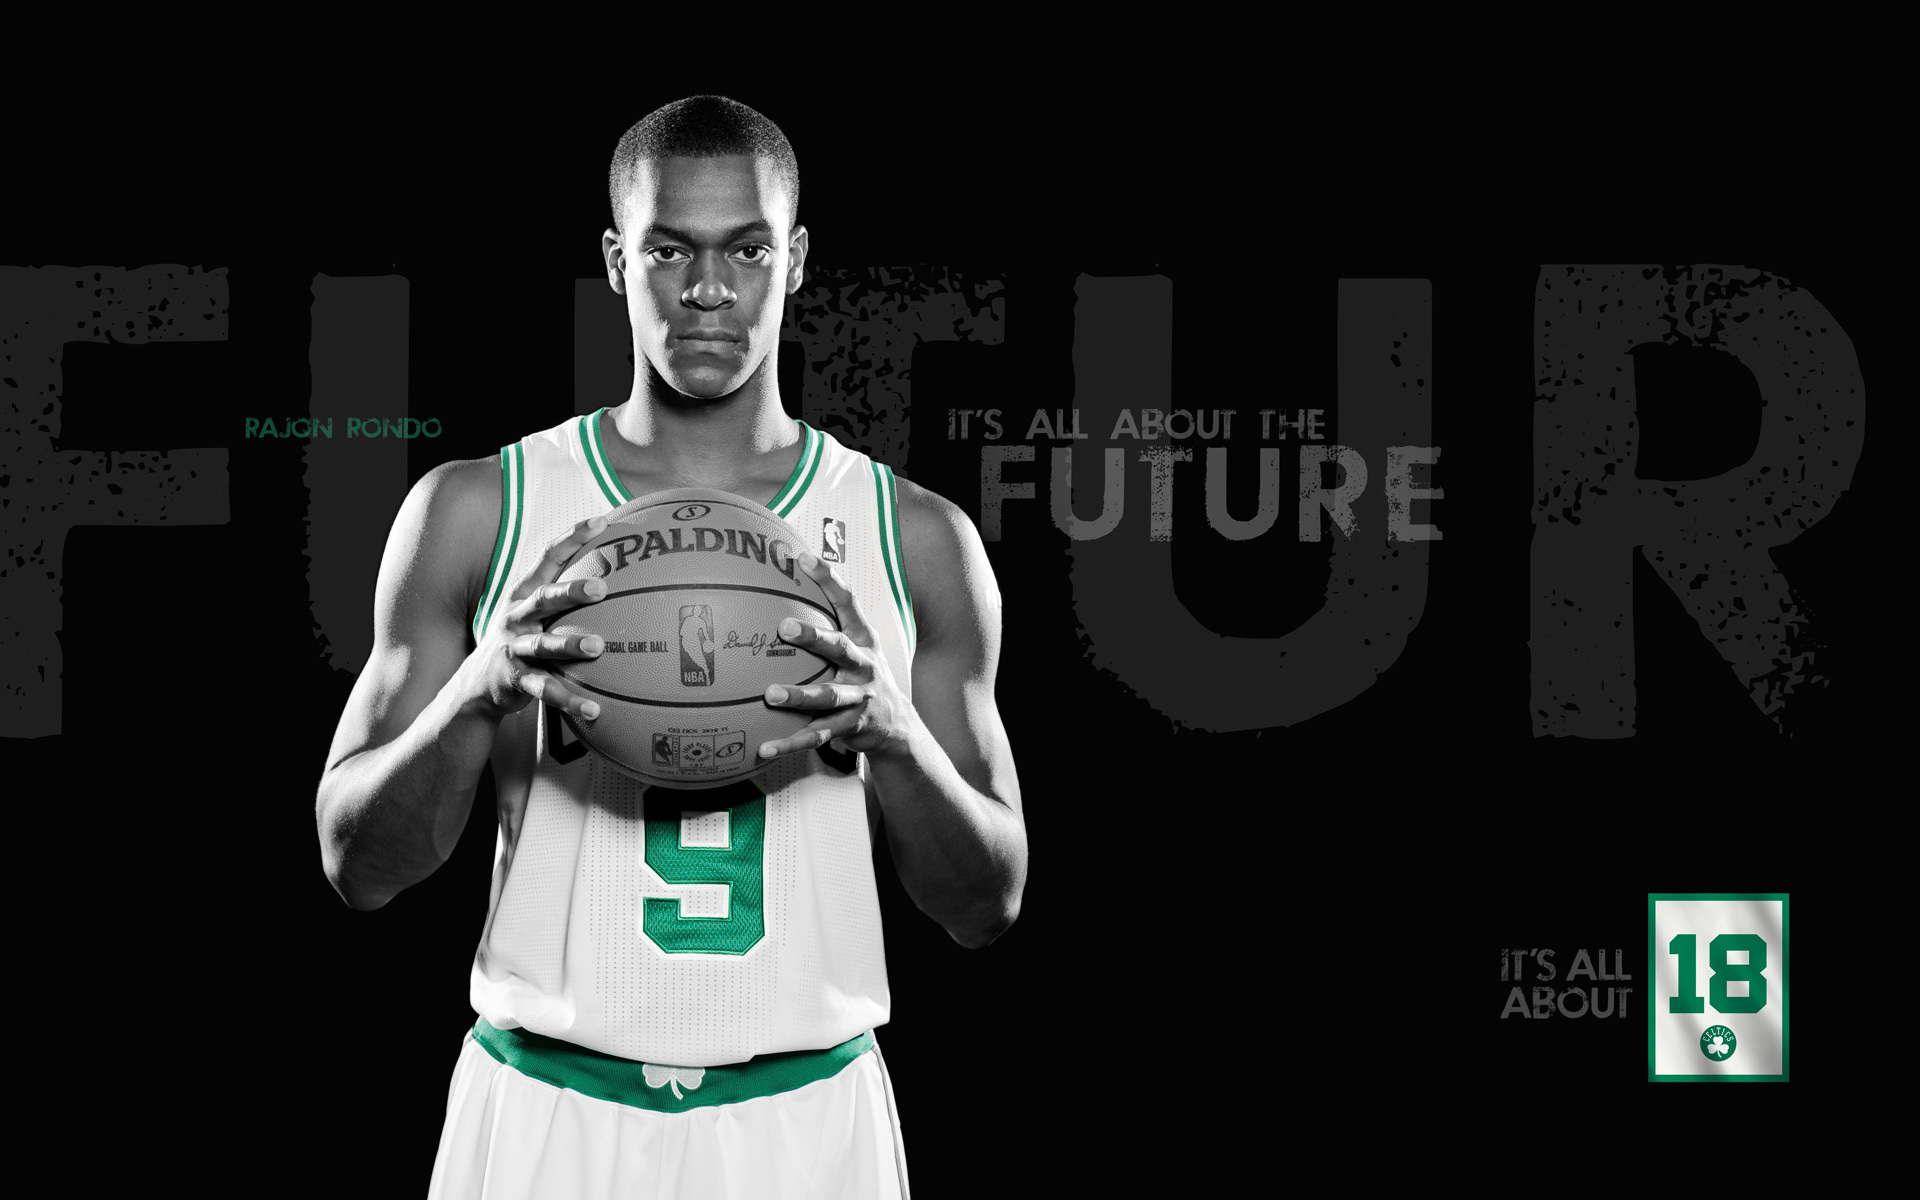 Rajon Rondo Image It S All About The Future HD Wallpaper And